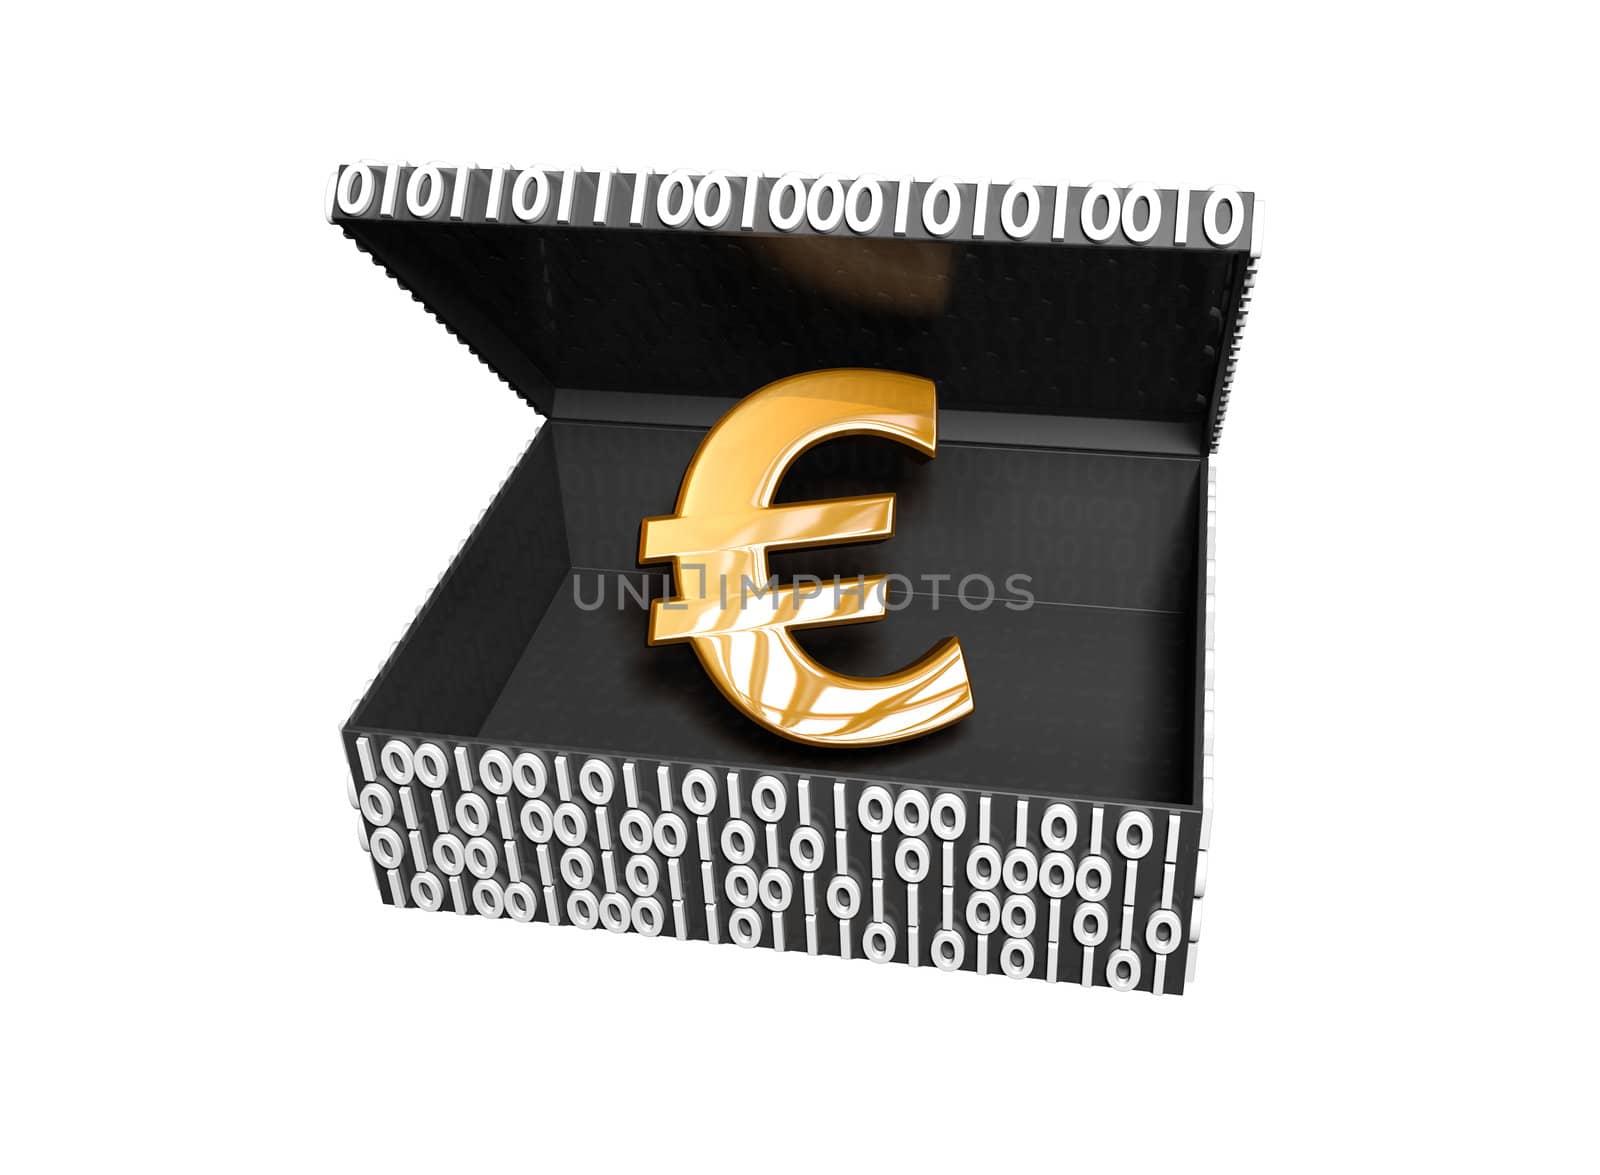 Euro symbol in a Numeric Box by shkyo30